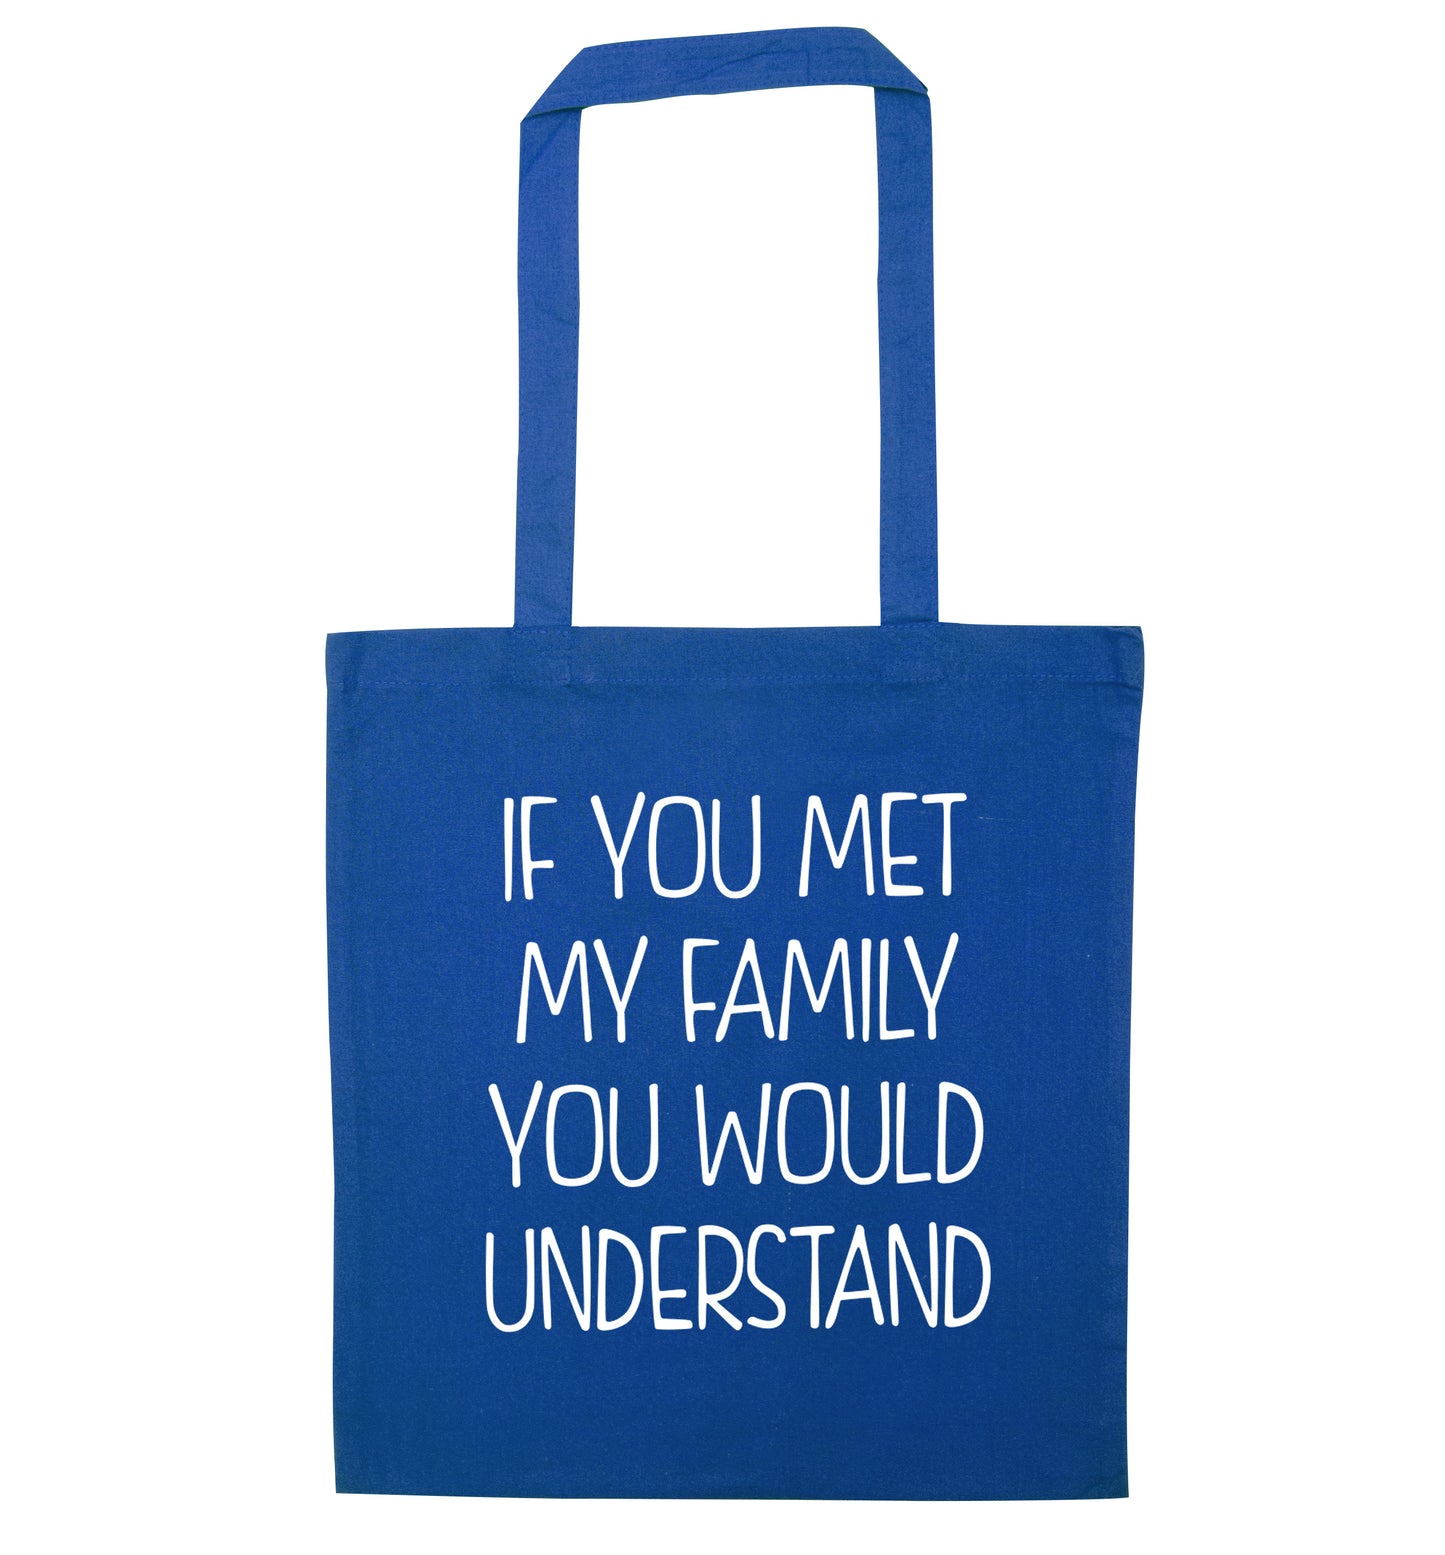 If you met my family you would understand blue tote bag